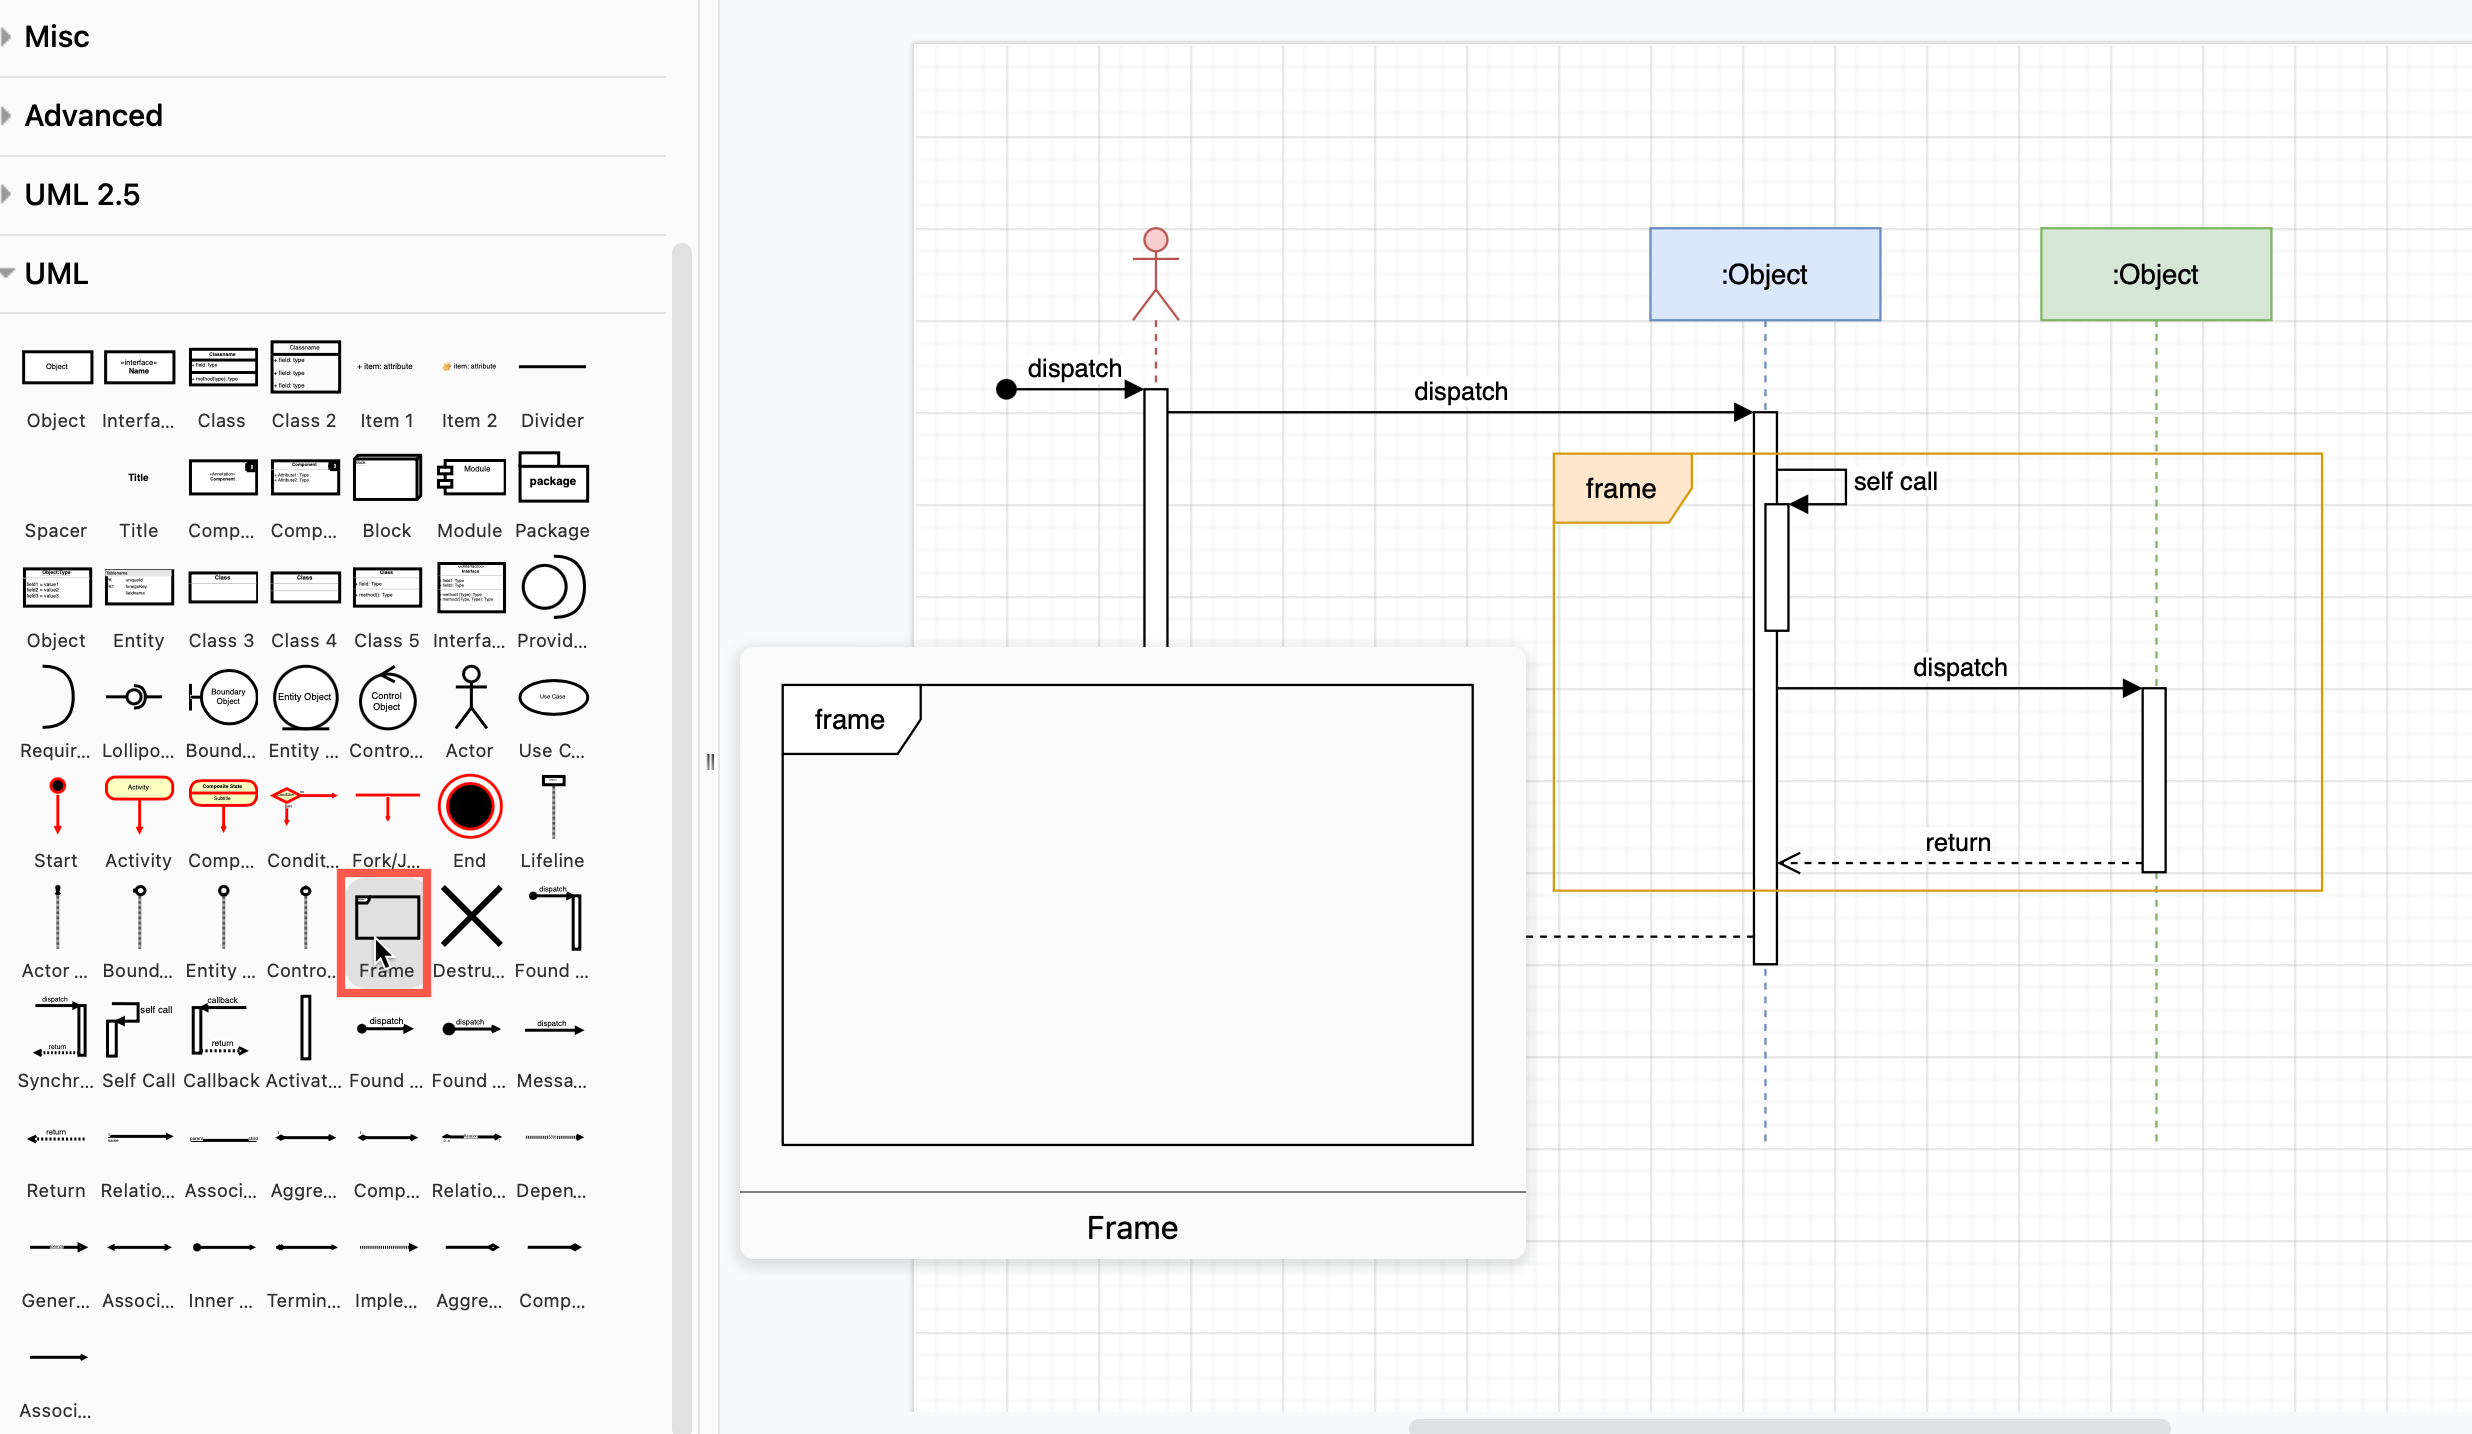 Use the Frame shape in the UML shape library to draw a sequence diagram in diagrams.net